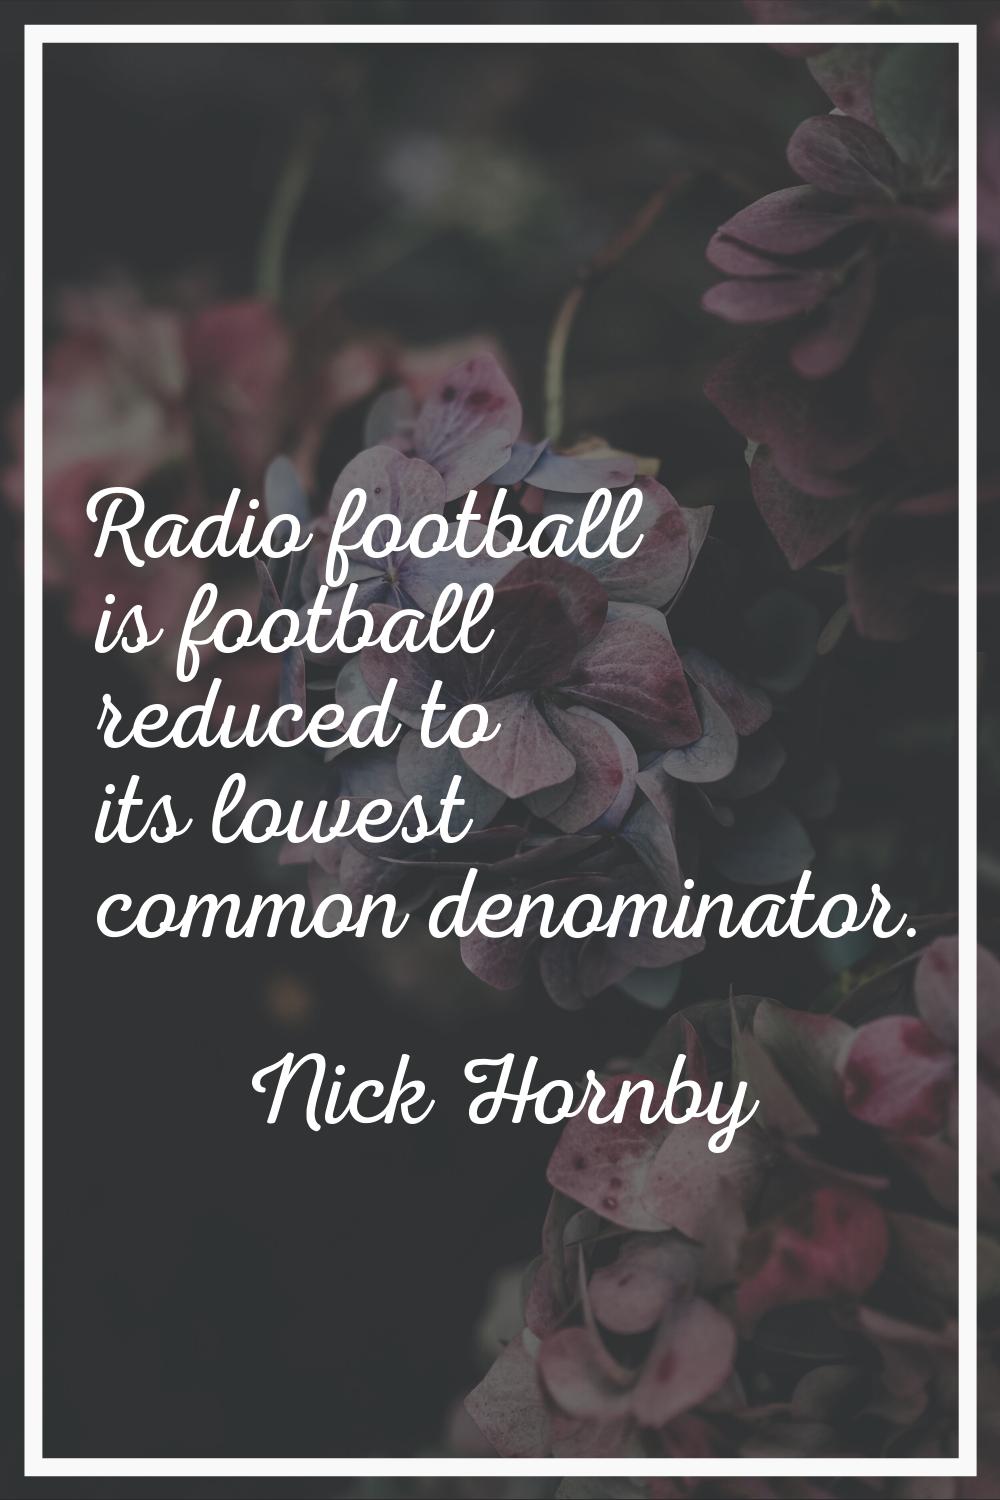 Radio football is football reduced to its lowest common denominator.